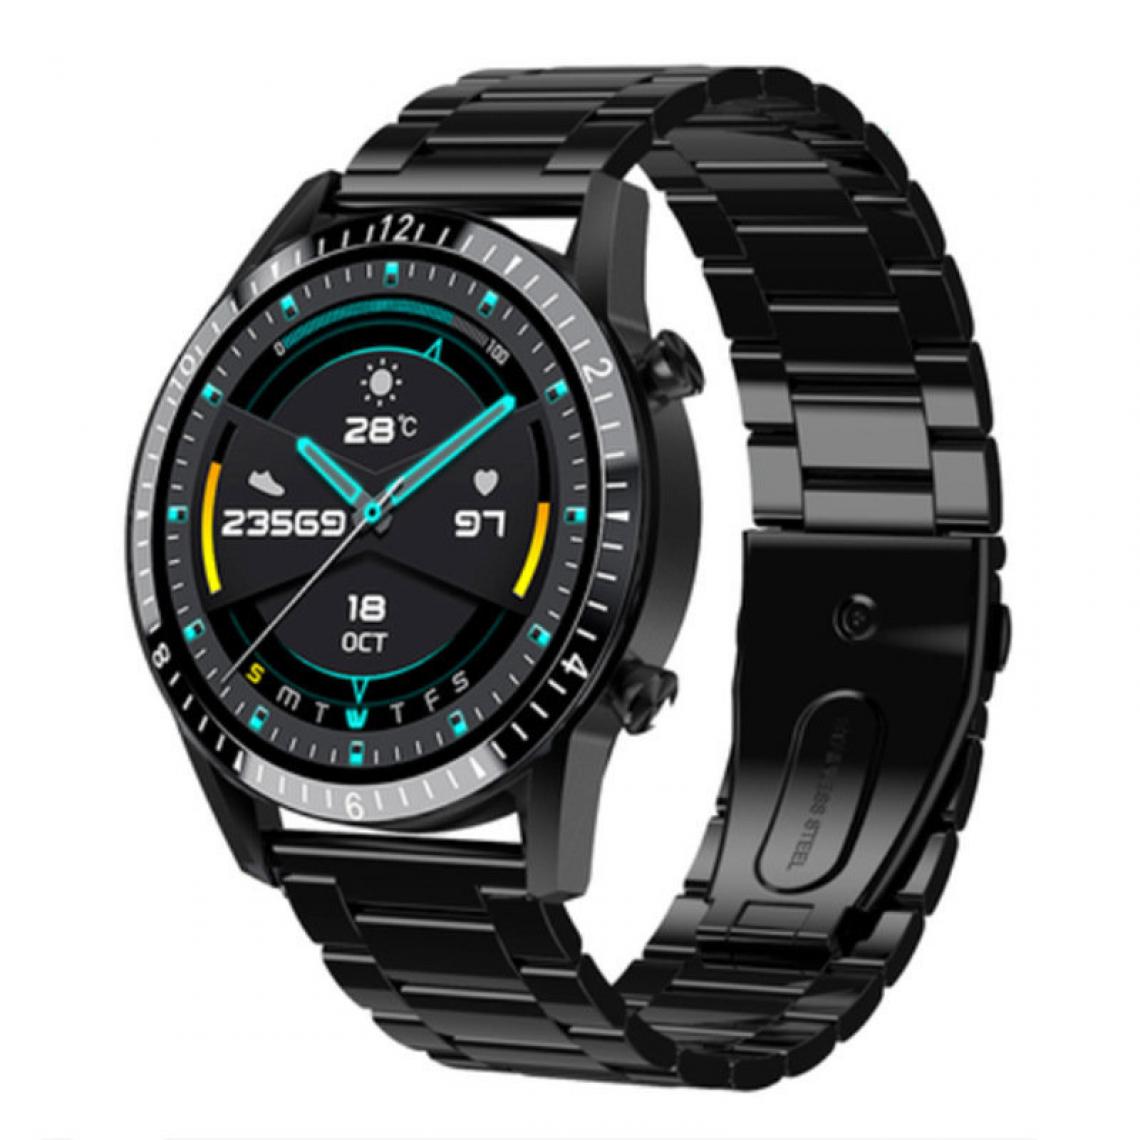 Chronotech Montres - Men's Connected Watch Smartwatch with Waterproof IP67 / Watch Phone / Sleep / Fitness Tracker / Pedometer, 10 Sport Modes for iOS / Android(black) - Montre connectée